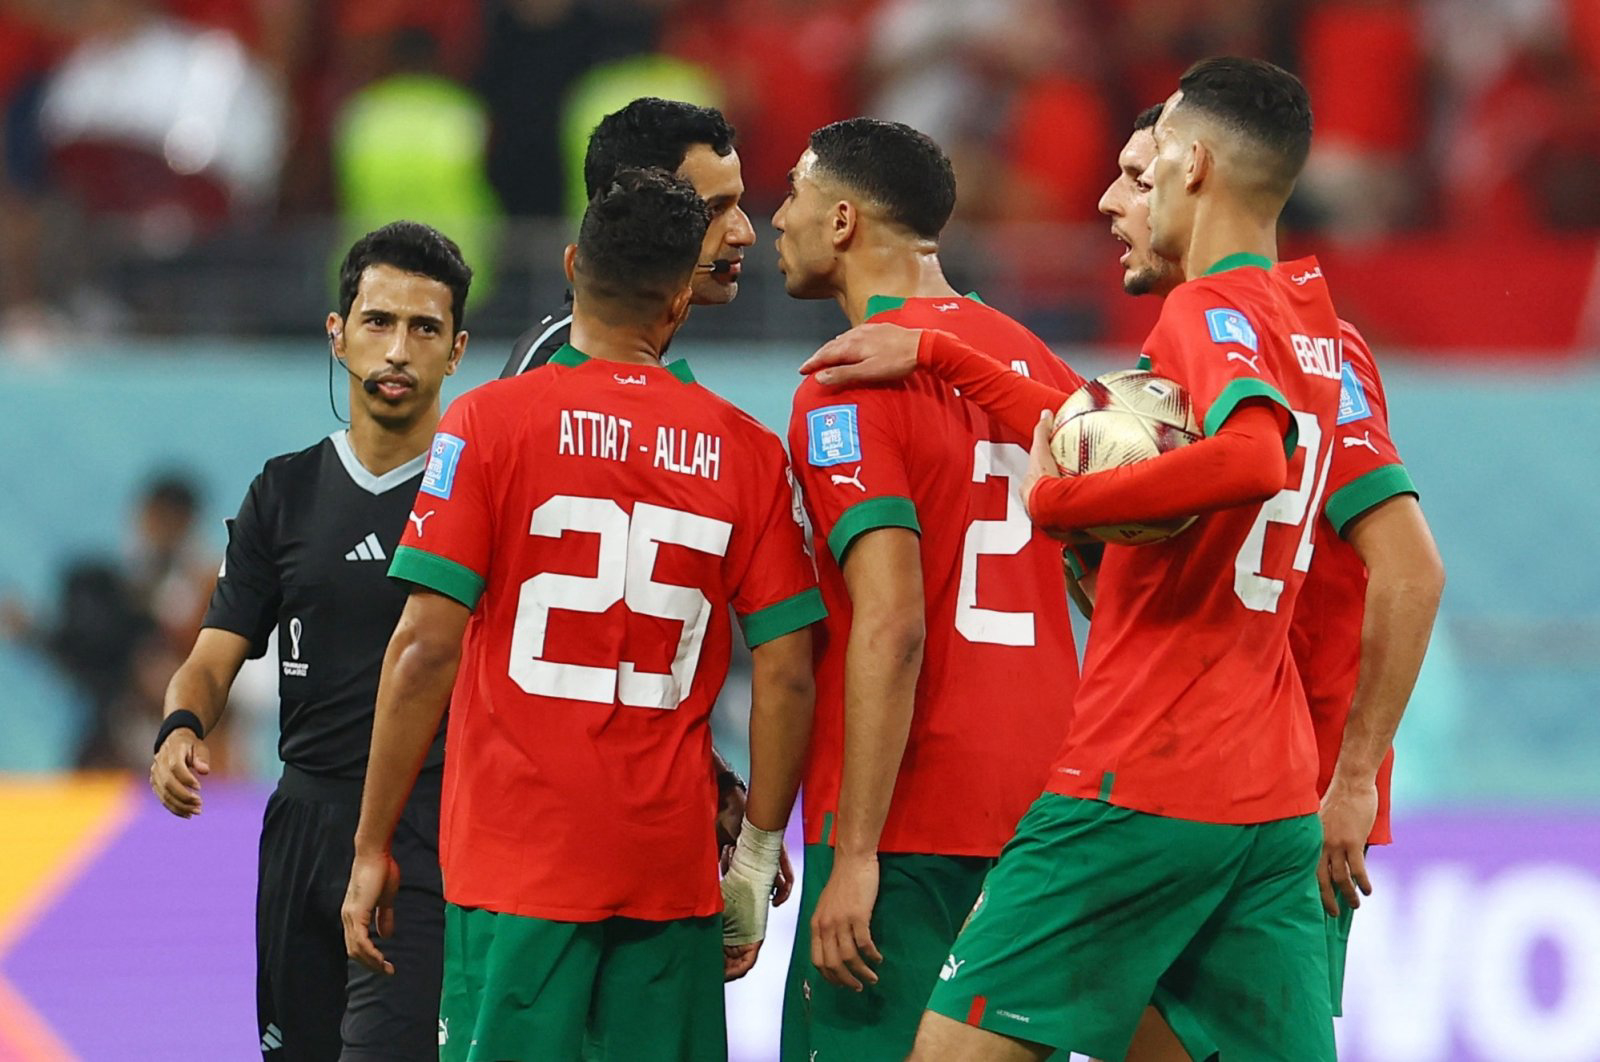 You are currently viewing Morocco Football Federation Threatens to Boycott African Nations Championship | The African Exponent.